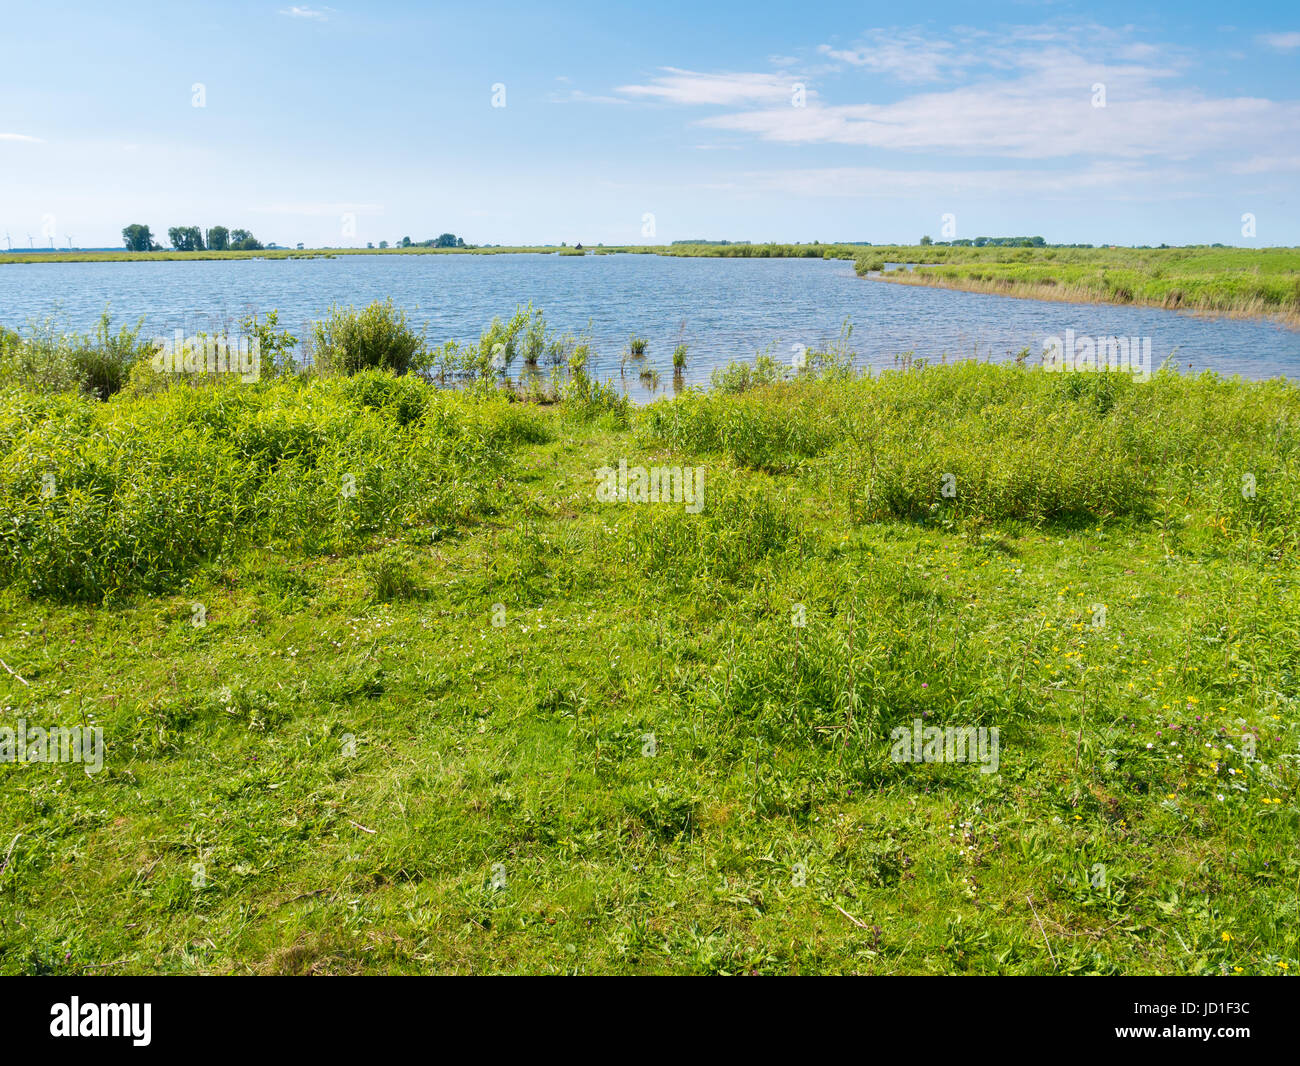 Landscape of polder with marsh and grass on Tiengemeten island in Haringvliet estuary, South Holland, Netherlands Stock Photo